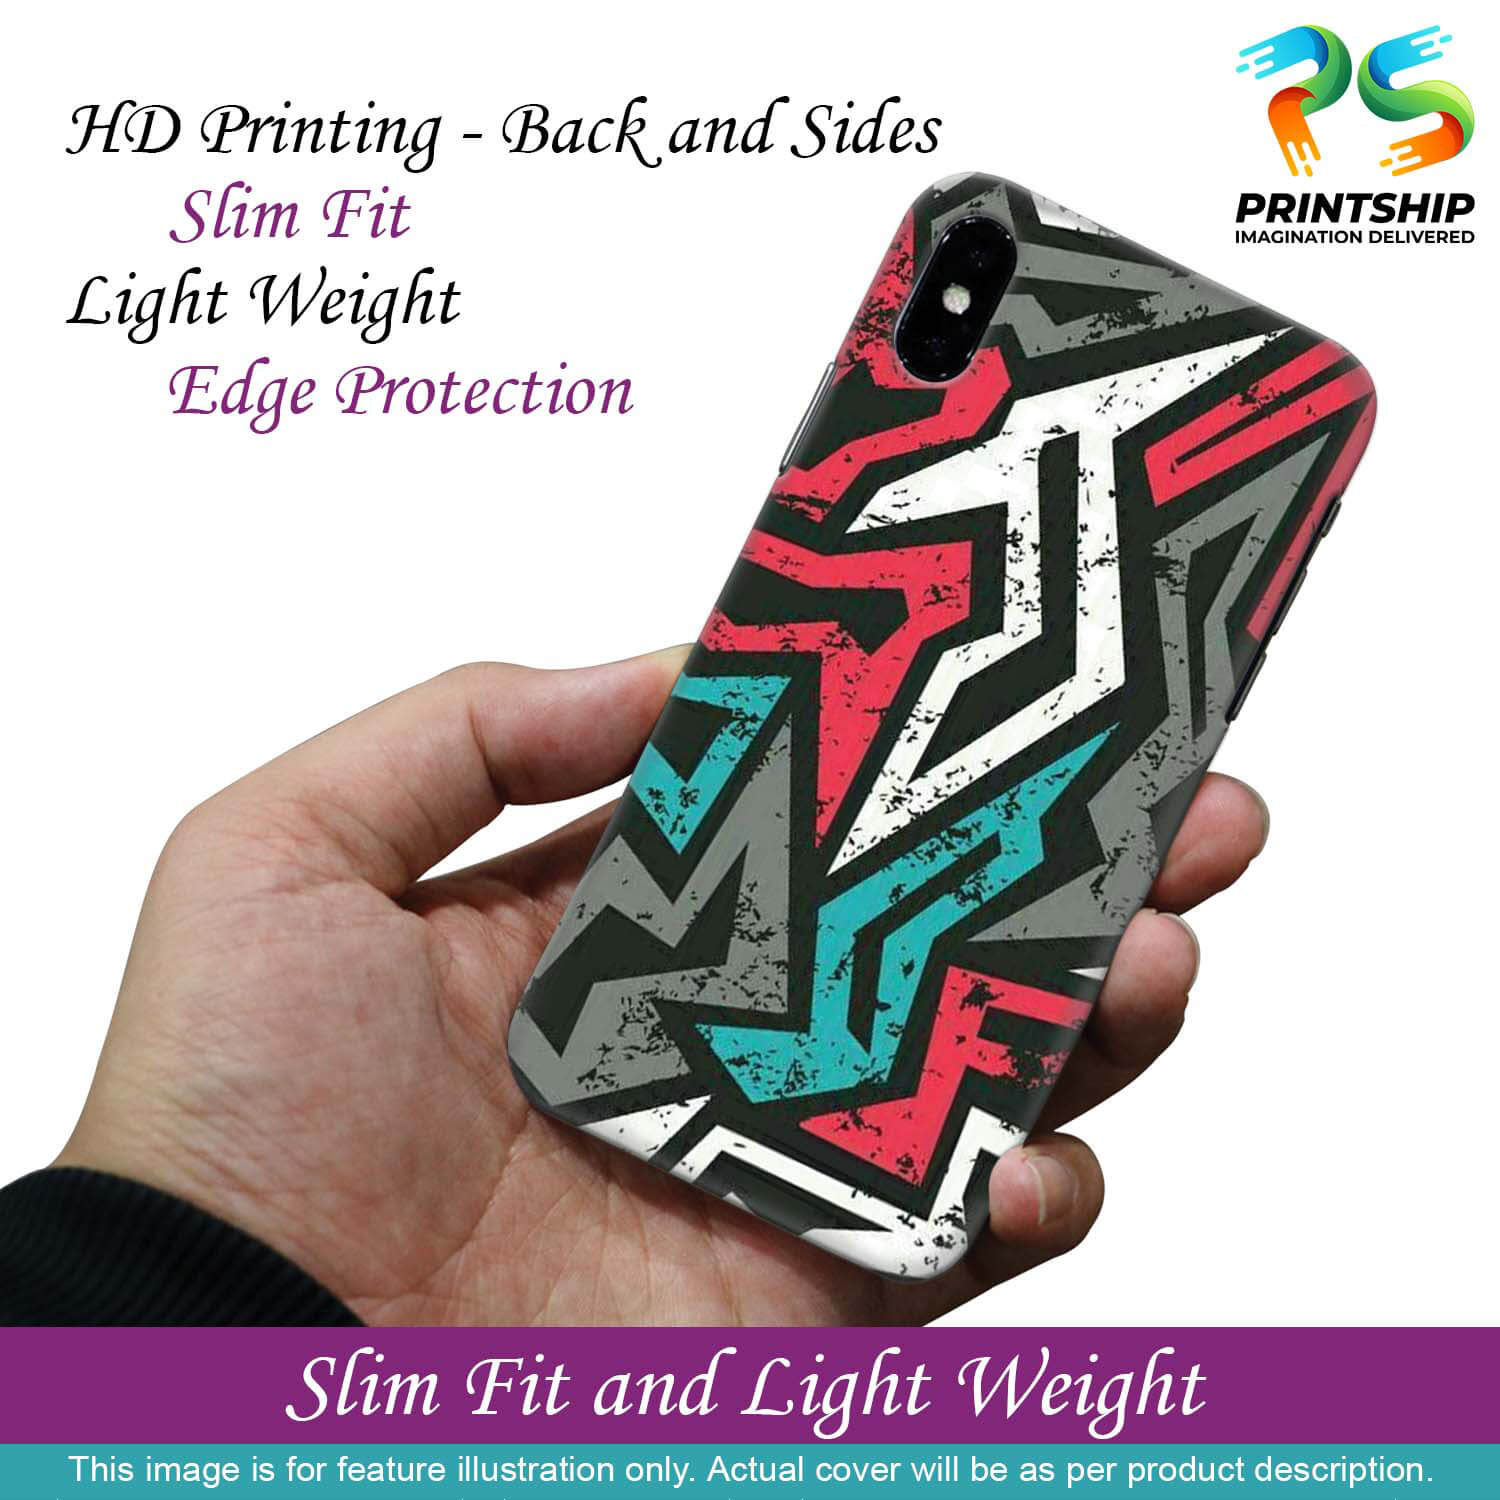 PS1312-Graffiti Abstract  Back Cover for Apple iPhone 11